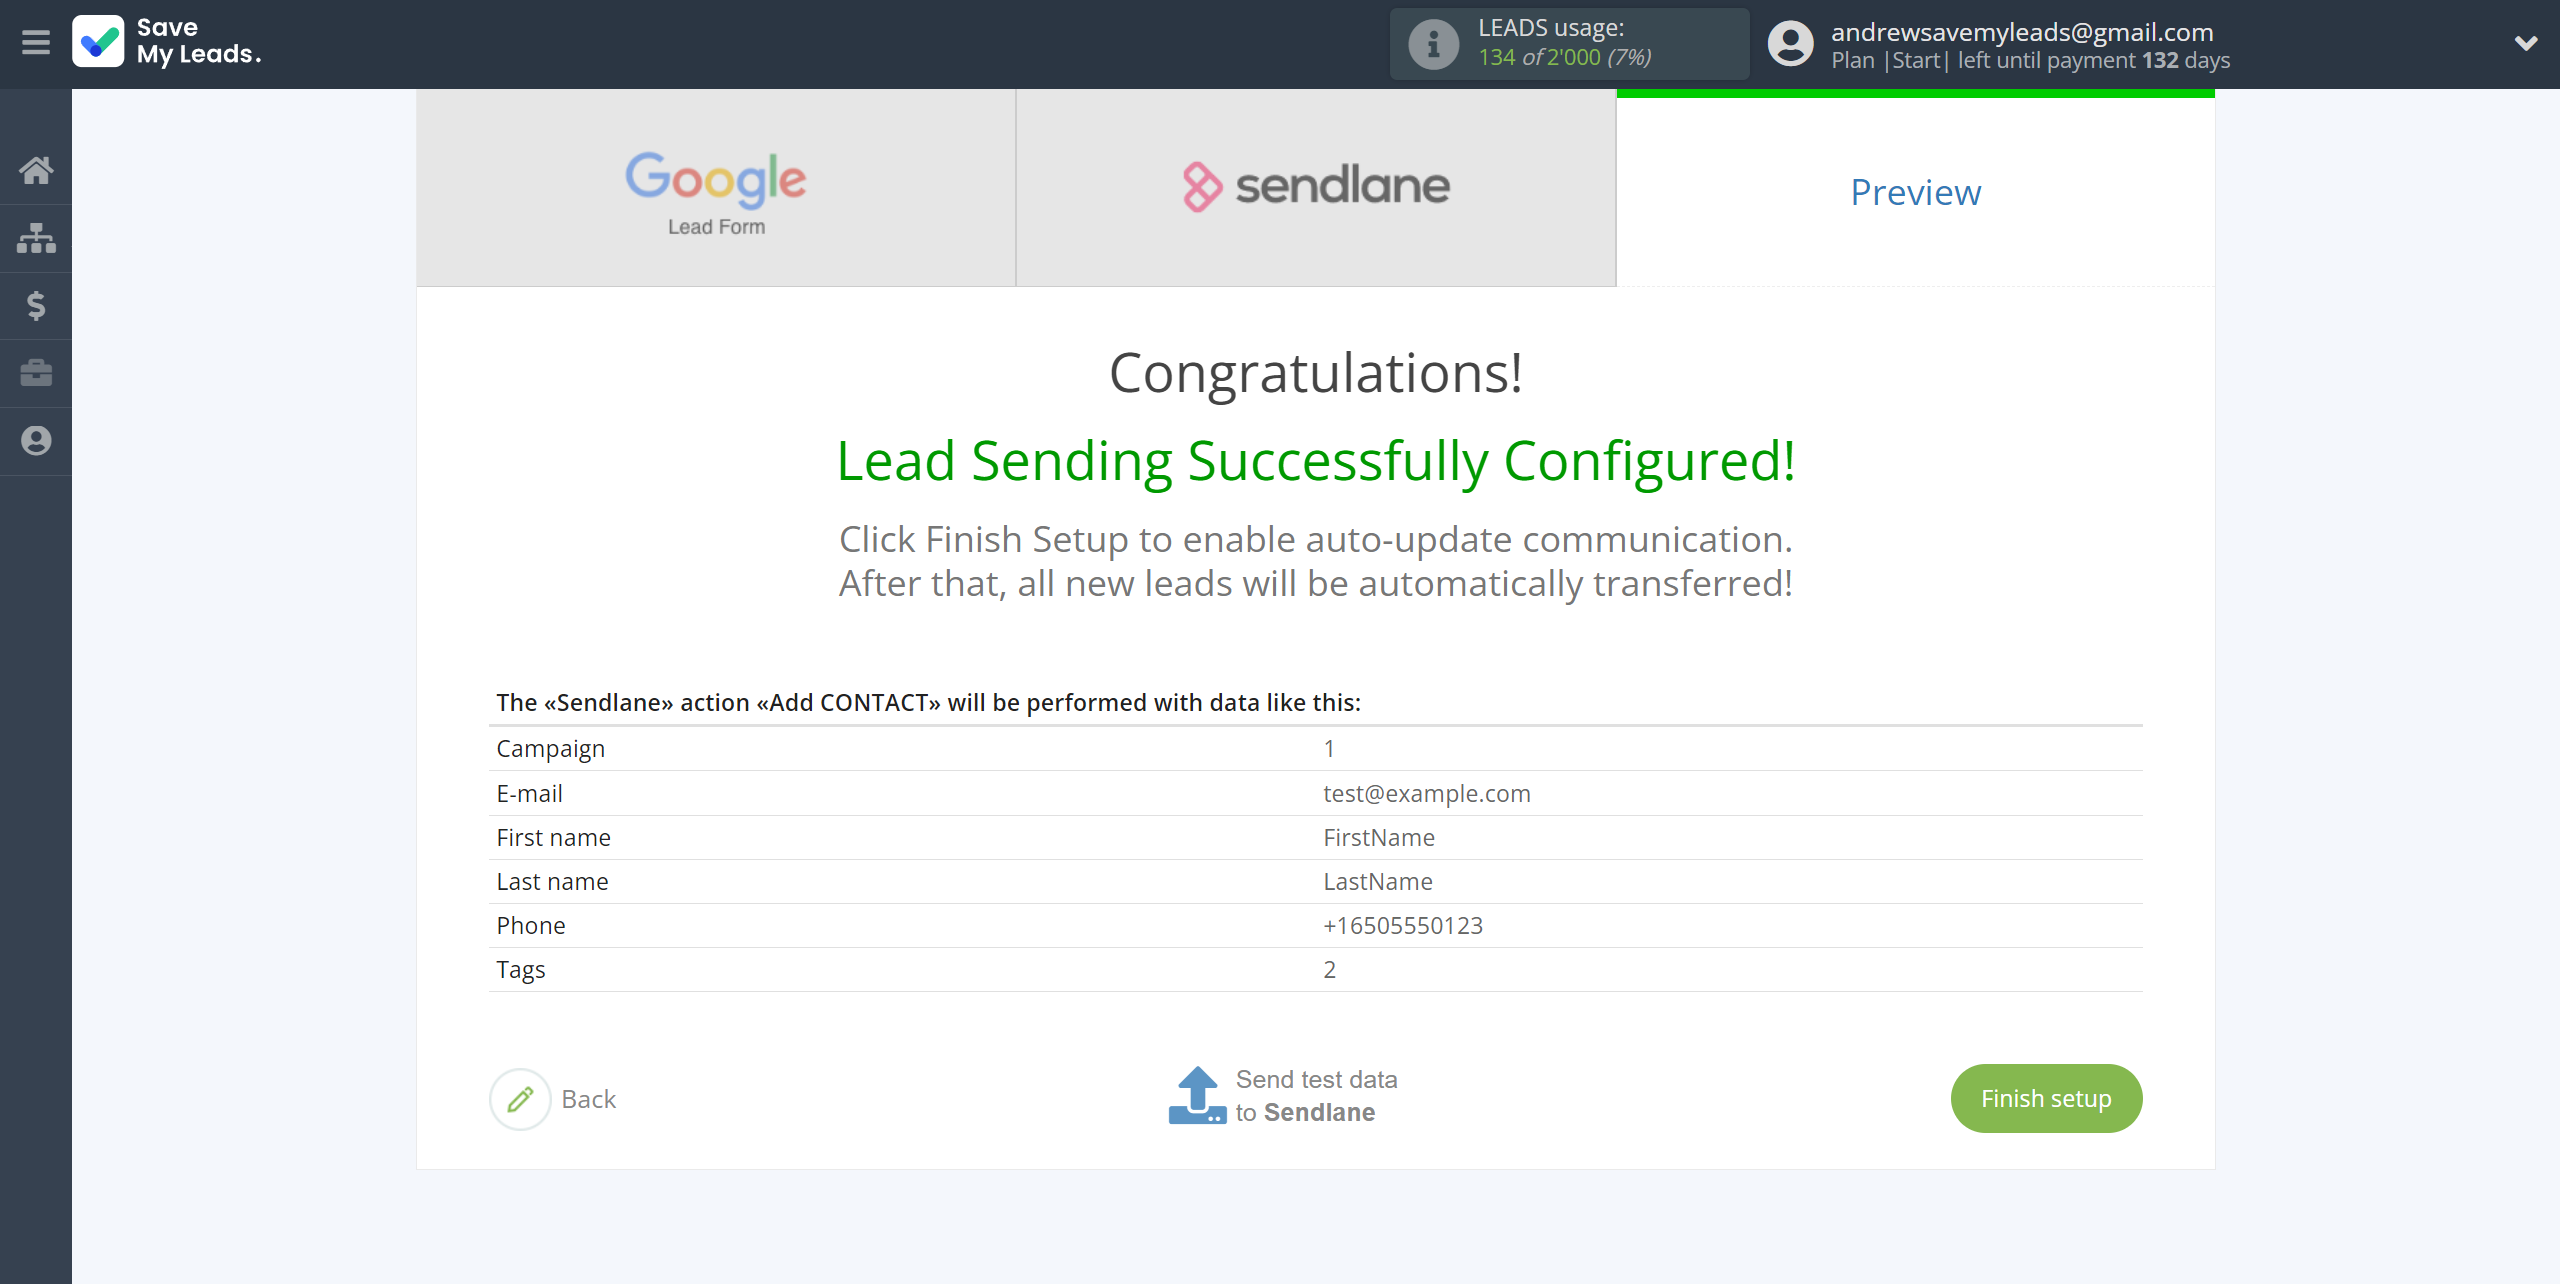 How to Connect Google Lead Form with Sendlane Add Contacts | Test data